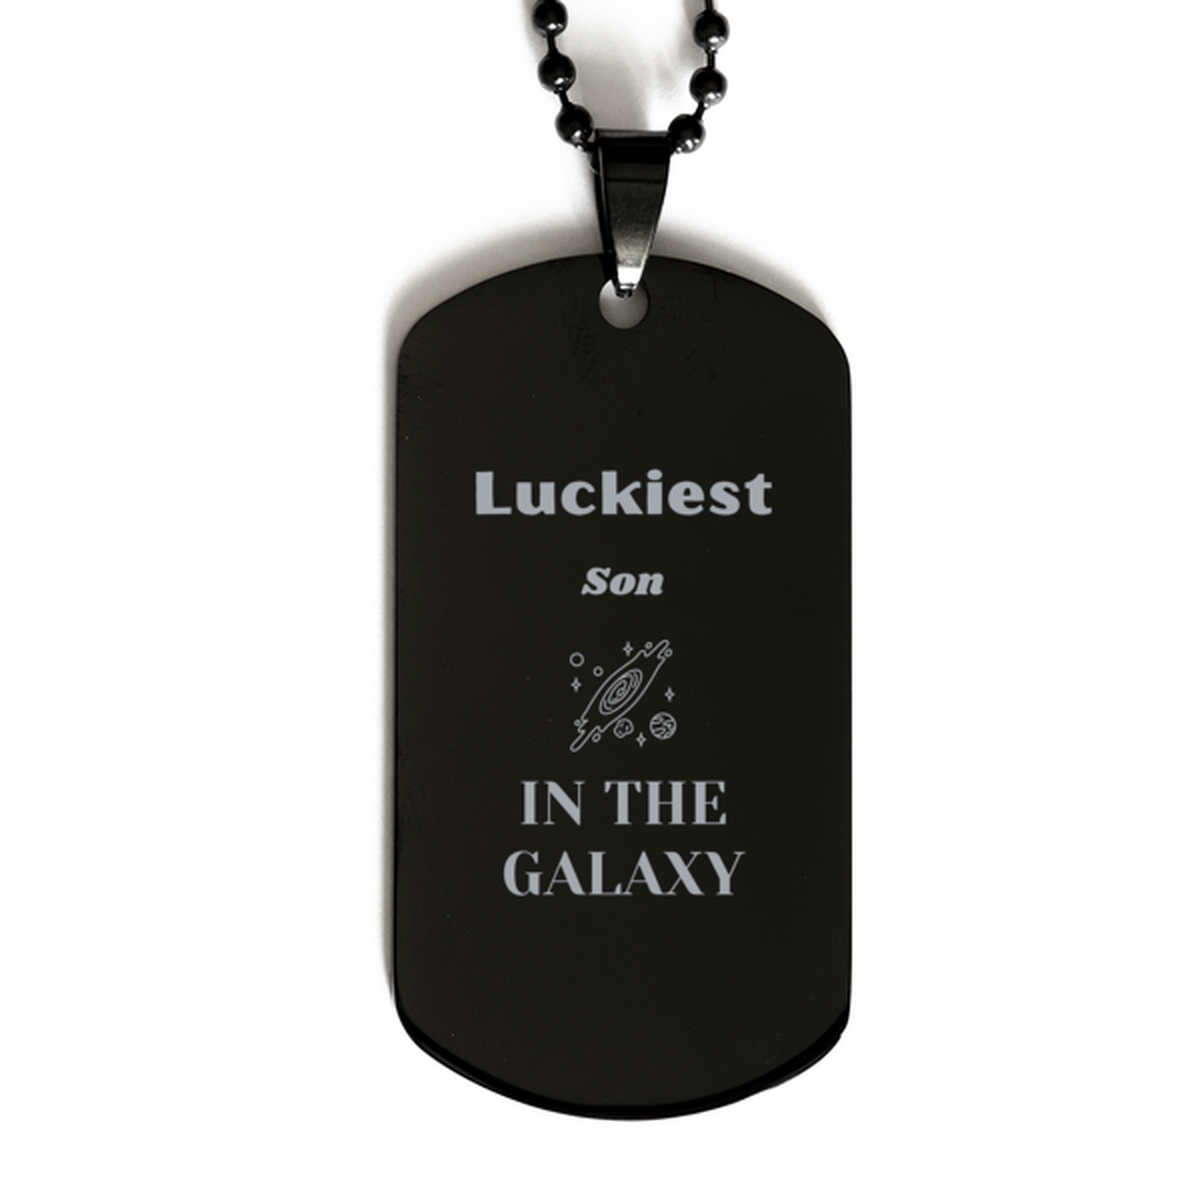 Luckiest Son in the Galaxy, To My Son Engraved Gifts, Christmas Son Black Dog Tag Gifts, X-mas Birthday Unique Gifts For Son Men Women